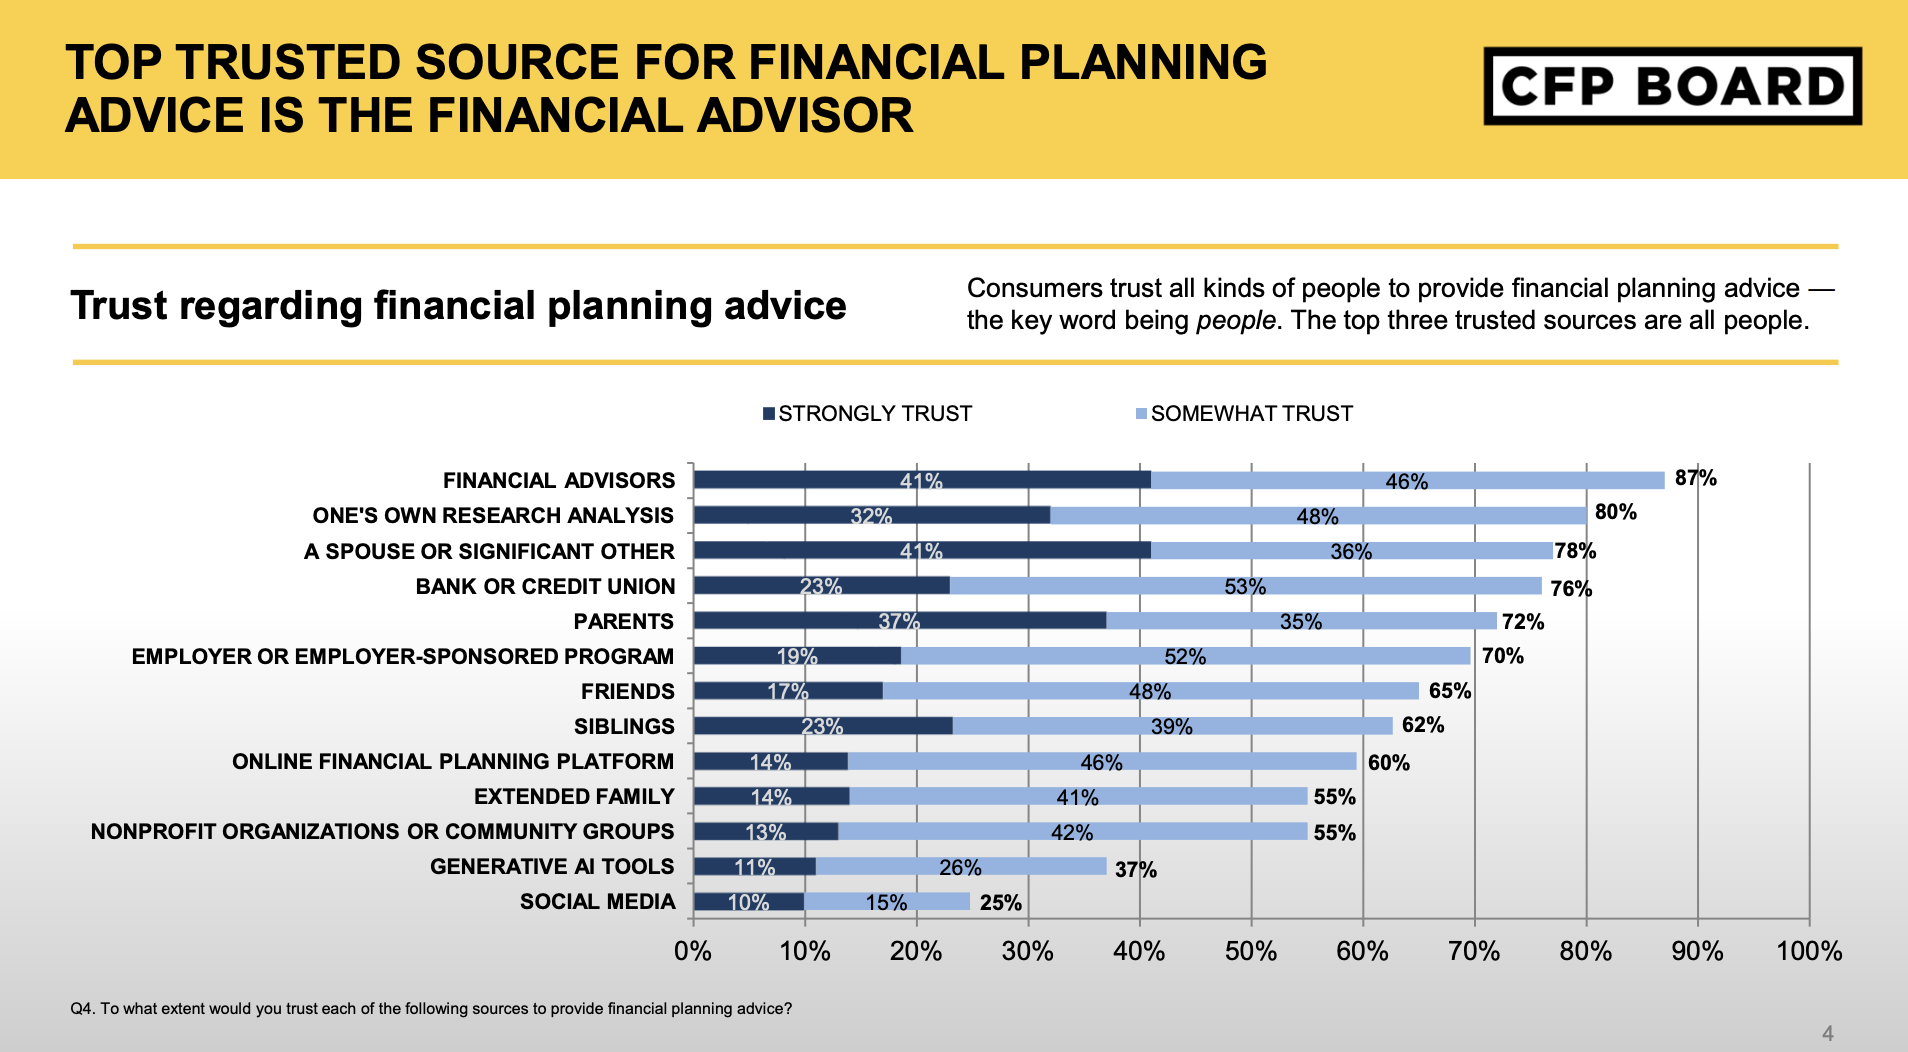 Image shows AI as the very trusted source for financial advice.